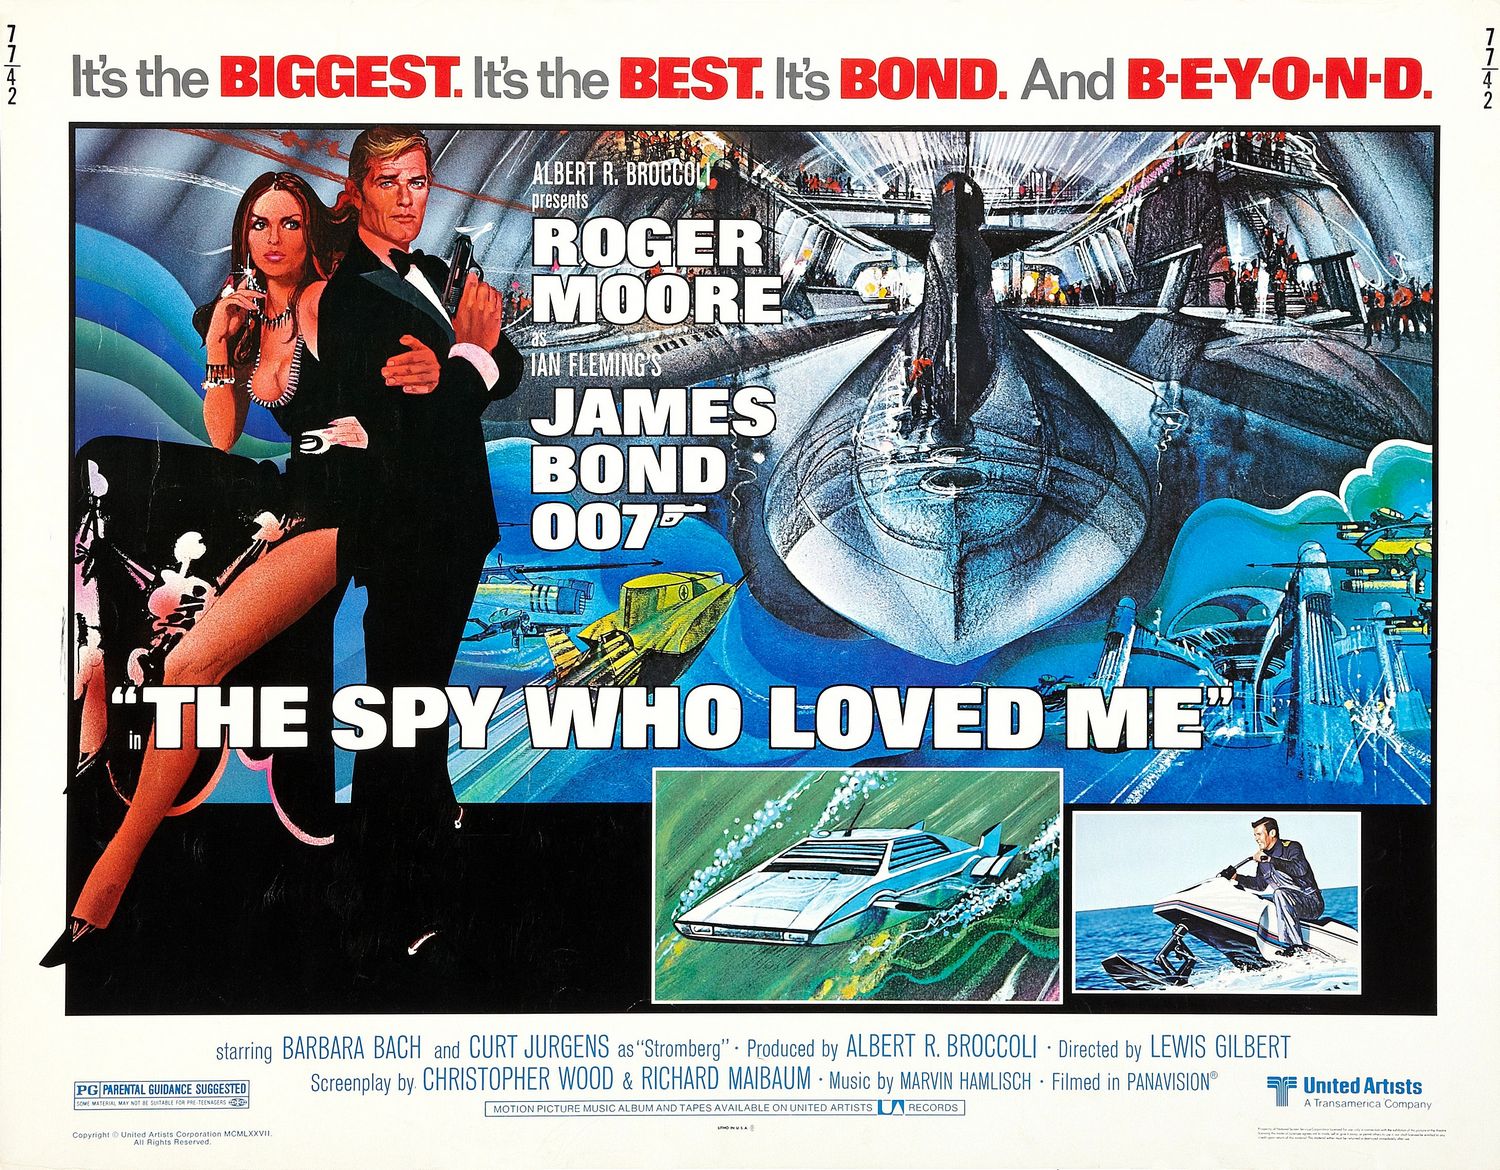 The Spy Who Loved Me #1